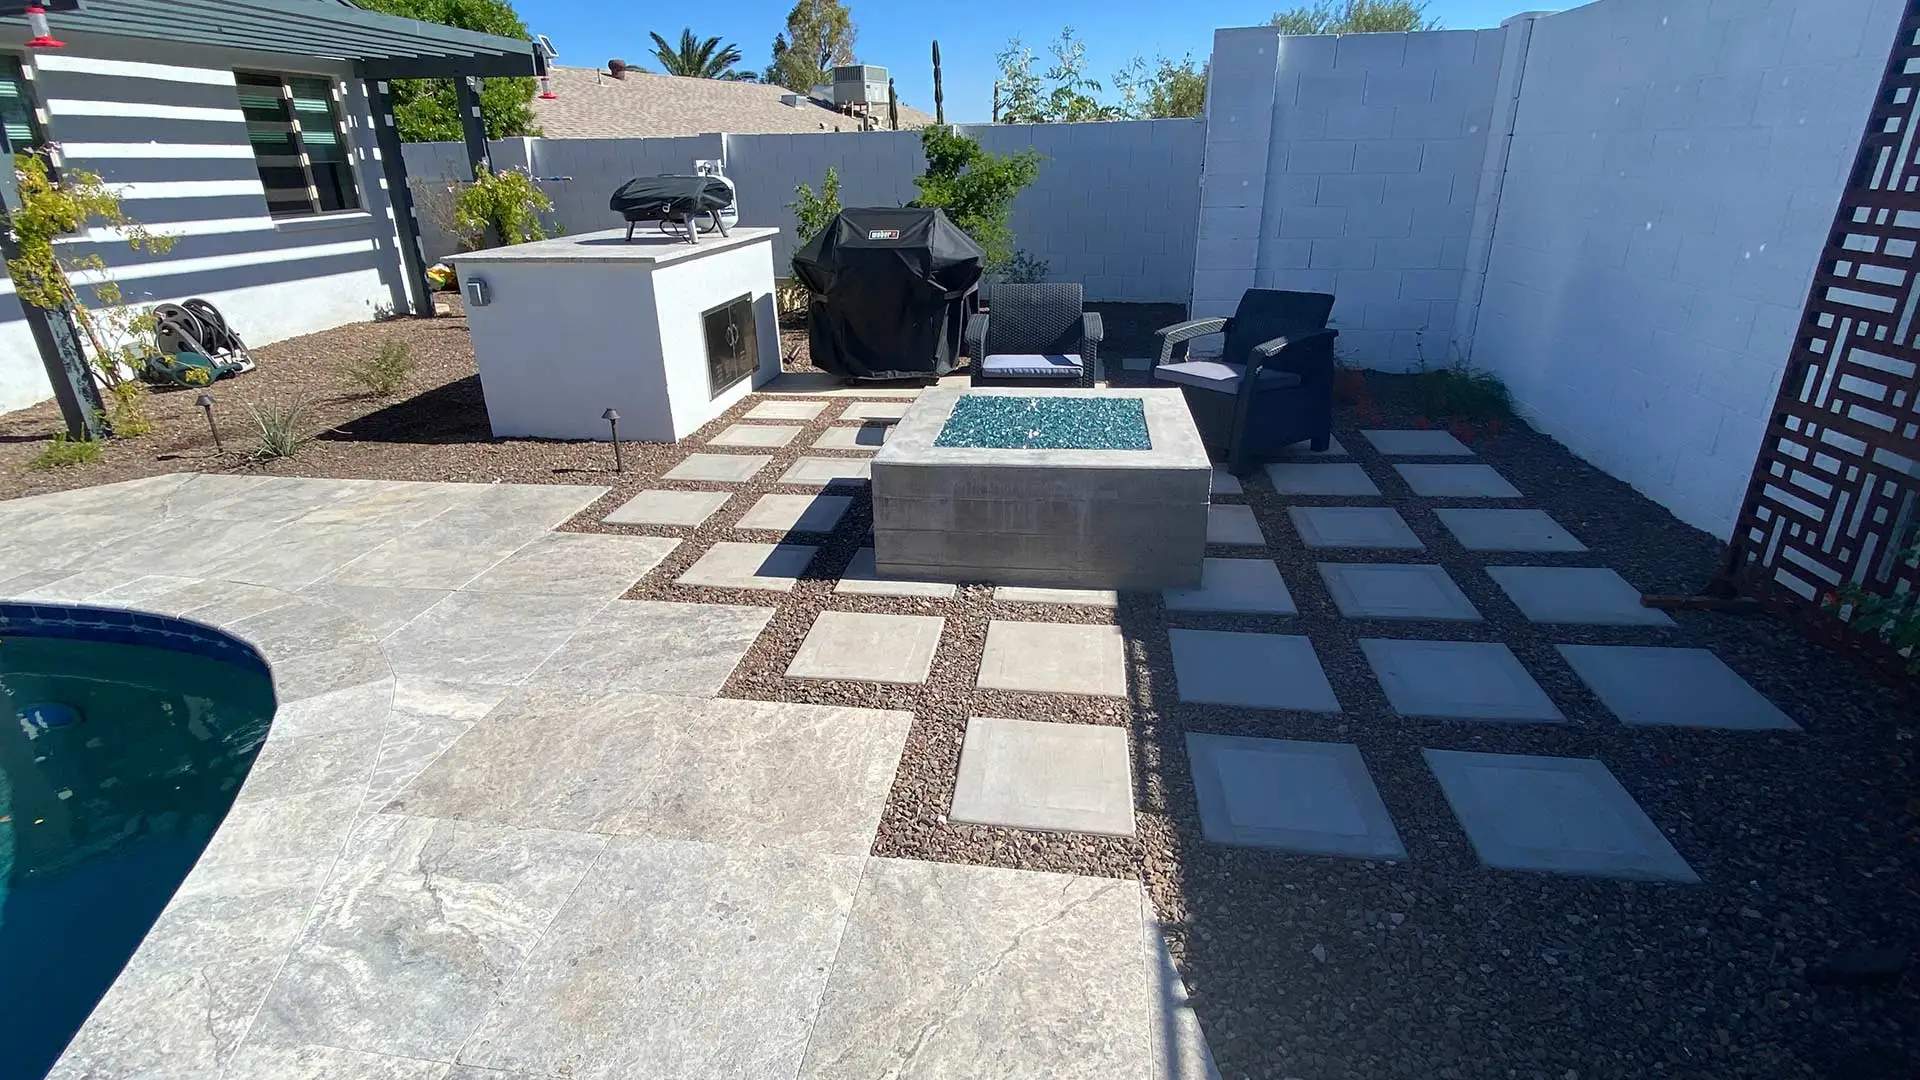 Patio with square pavers installed beside outdoor kitchen and fire pit in Glendale, AZ.